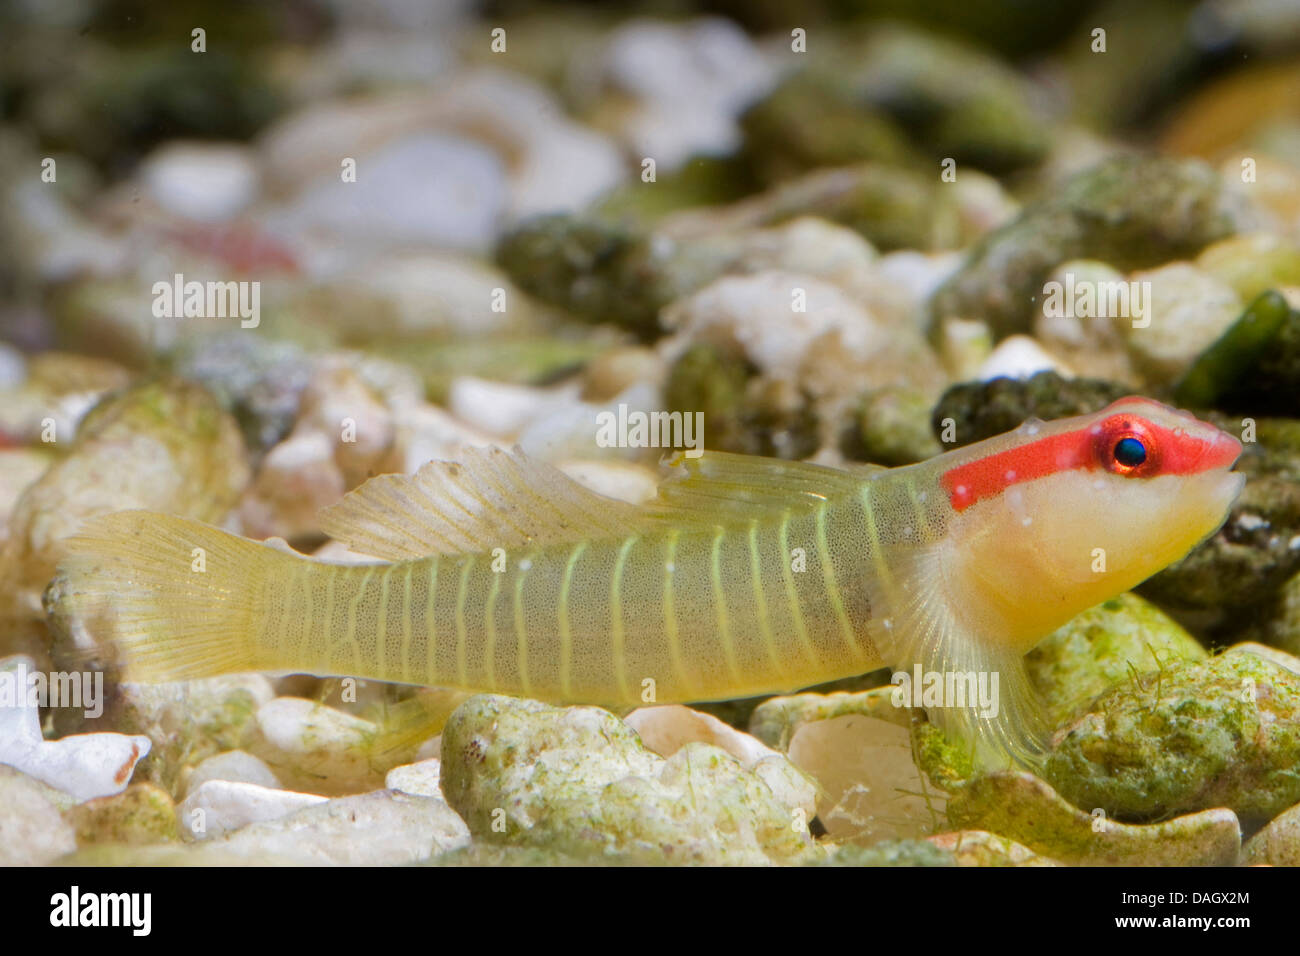 Greenbanded Goby, Green banded Goby (Elacatinus multifasciatus), swimming at the pebble ground of a water Stock Photo